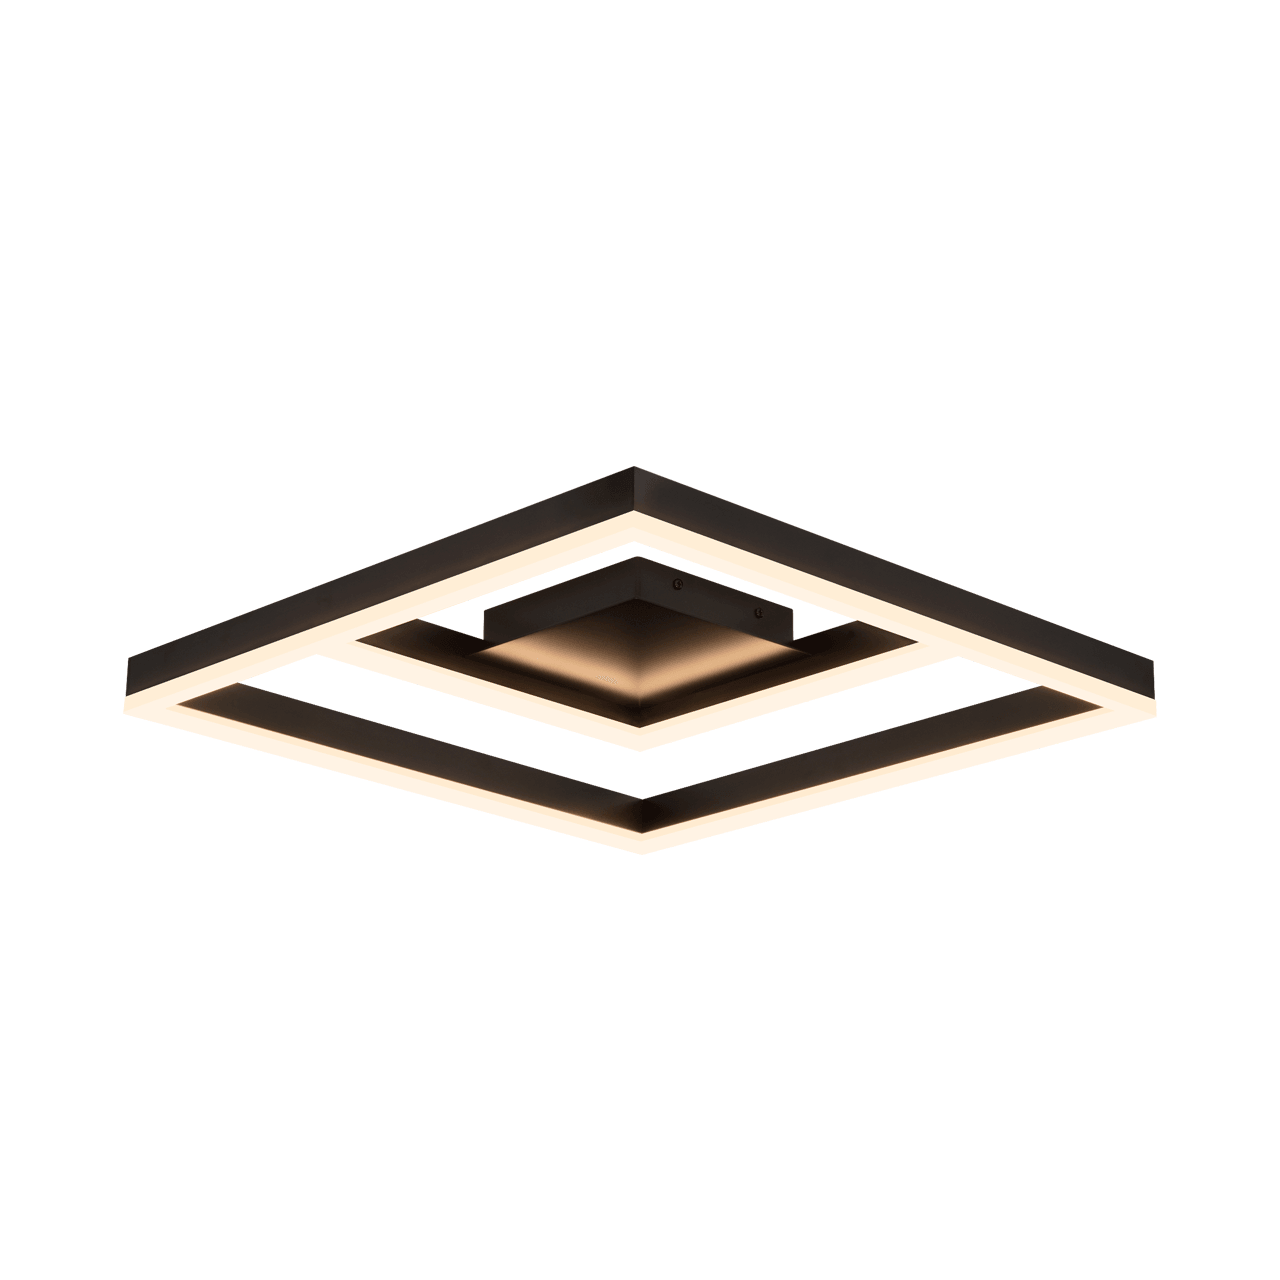 Pageone - Symmetry 17.7"L. Ceiling - Hbdepot